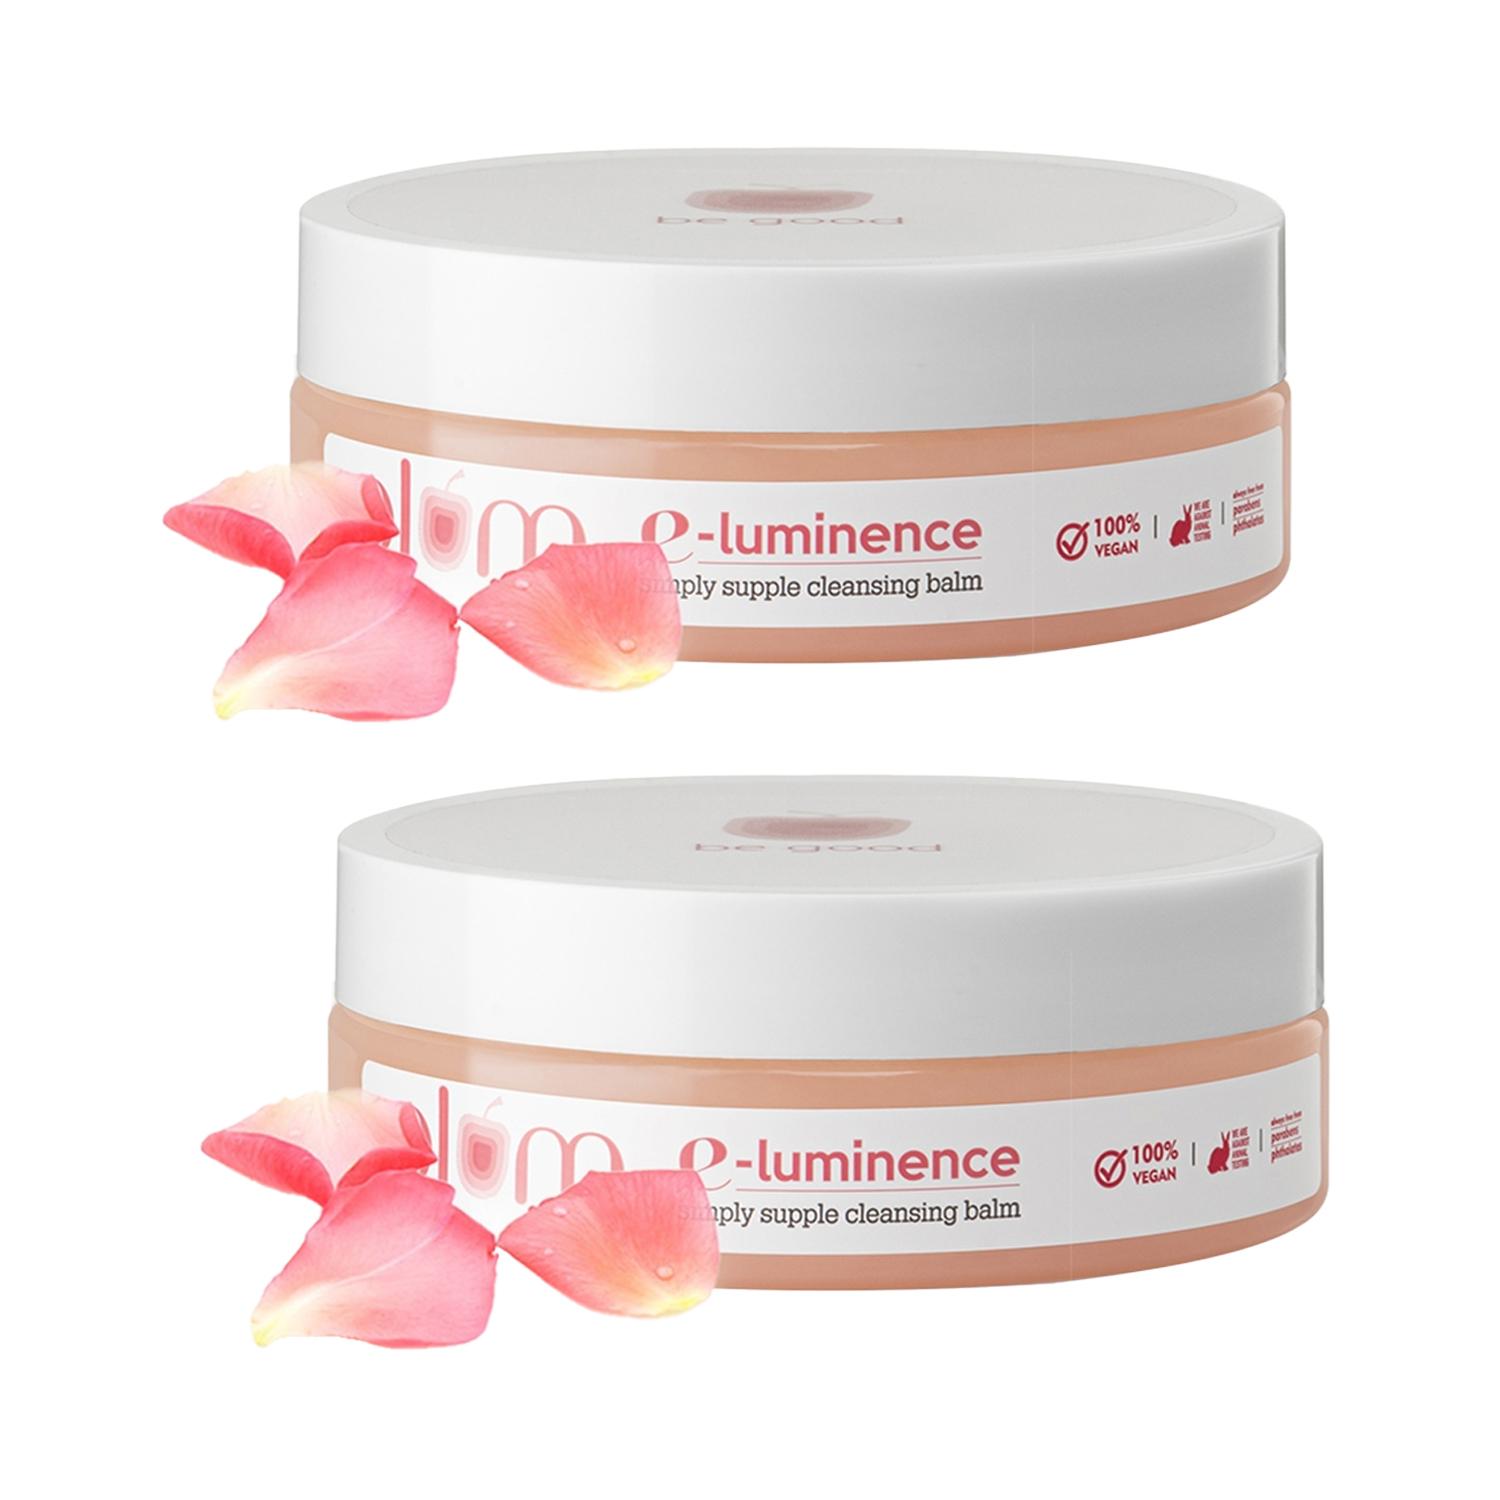 Plum | Plum E-Luminence Simply Supple Cleansing Balm (90 g) - Pack of 2 Combo